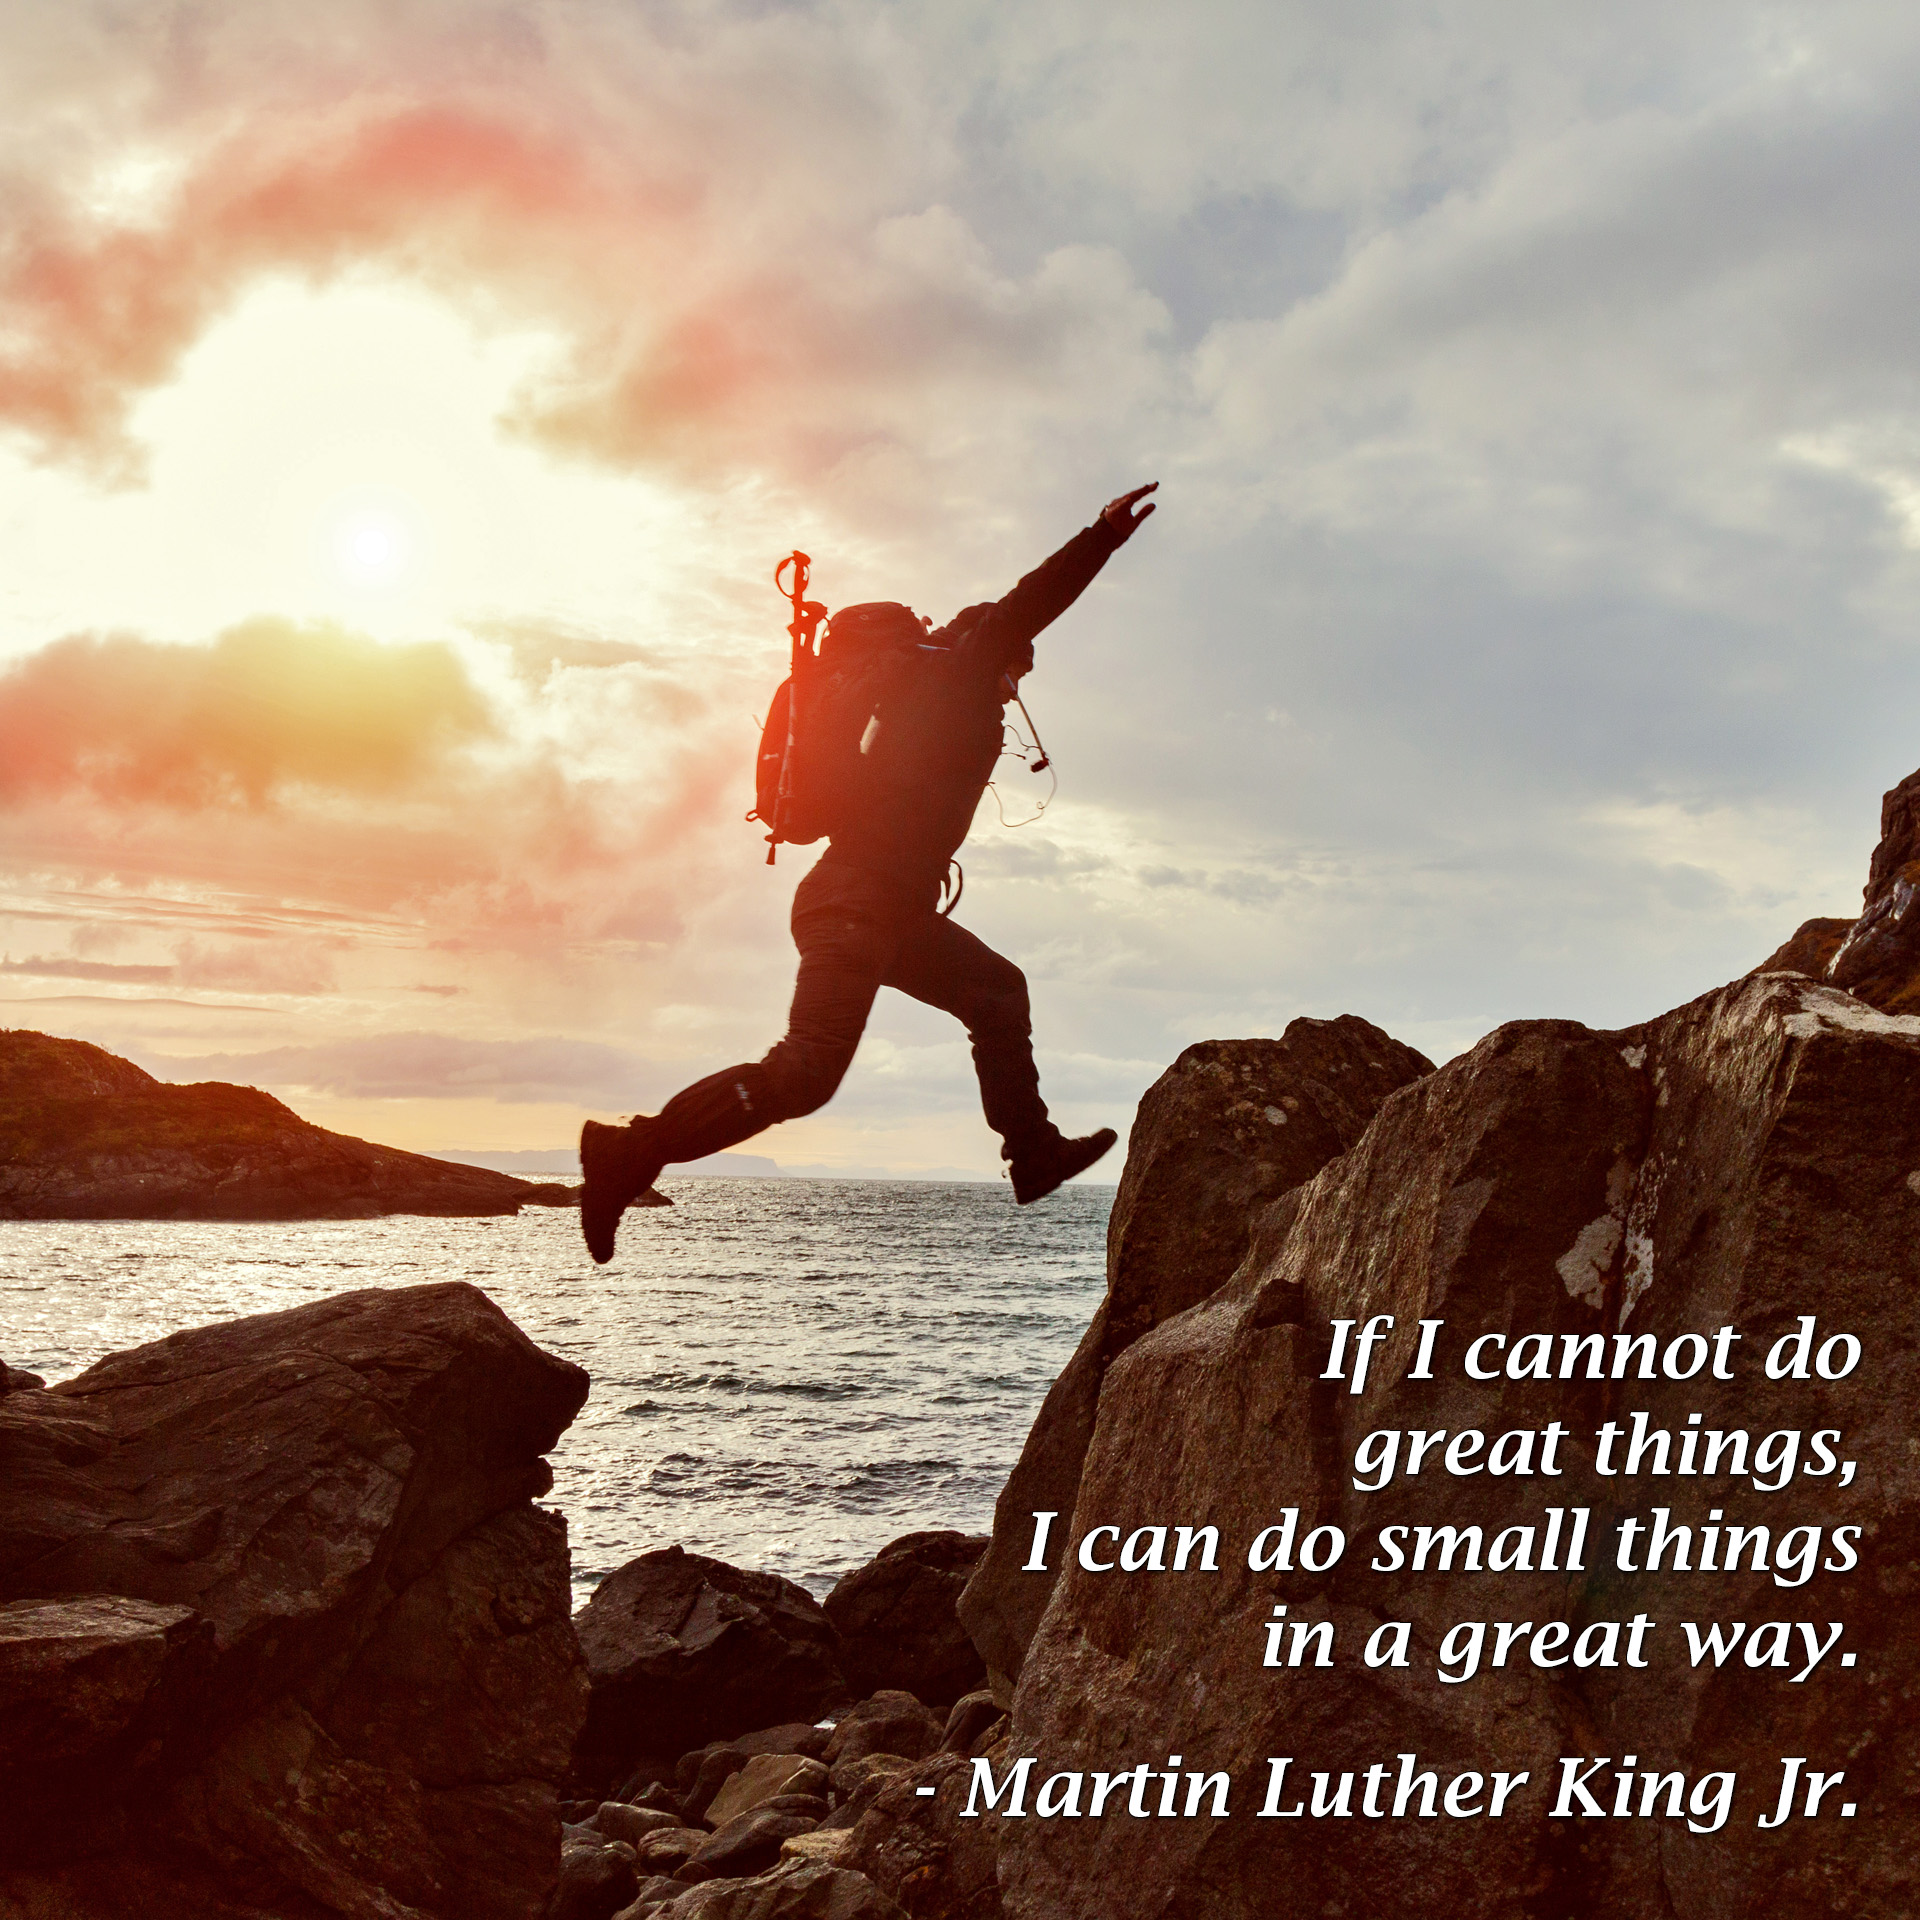 If I cannot do great things, I can do small things in a great way. - Martin Luther King Jr.